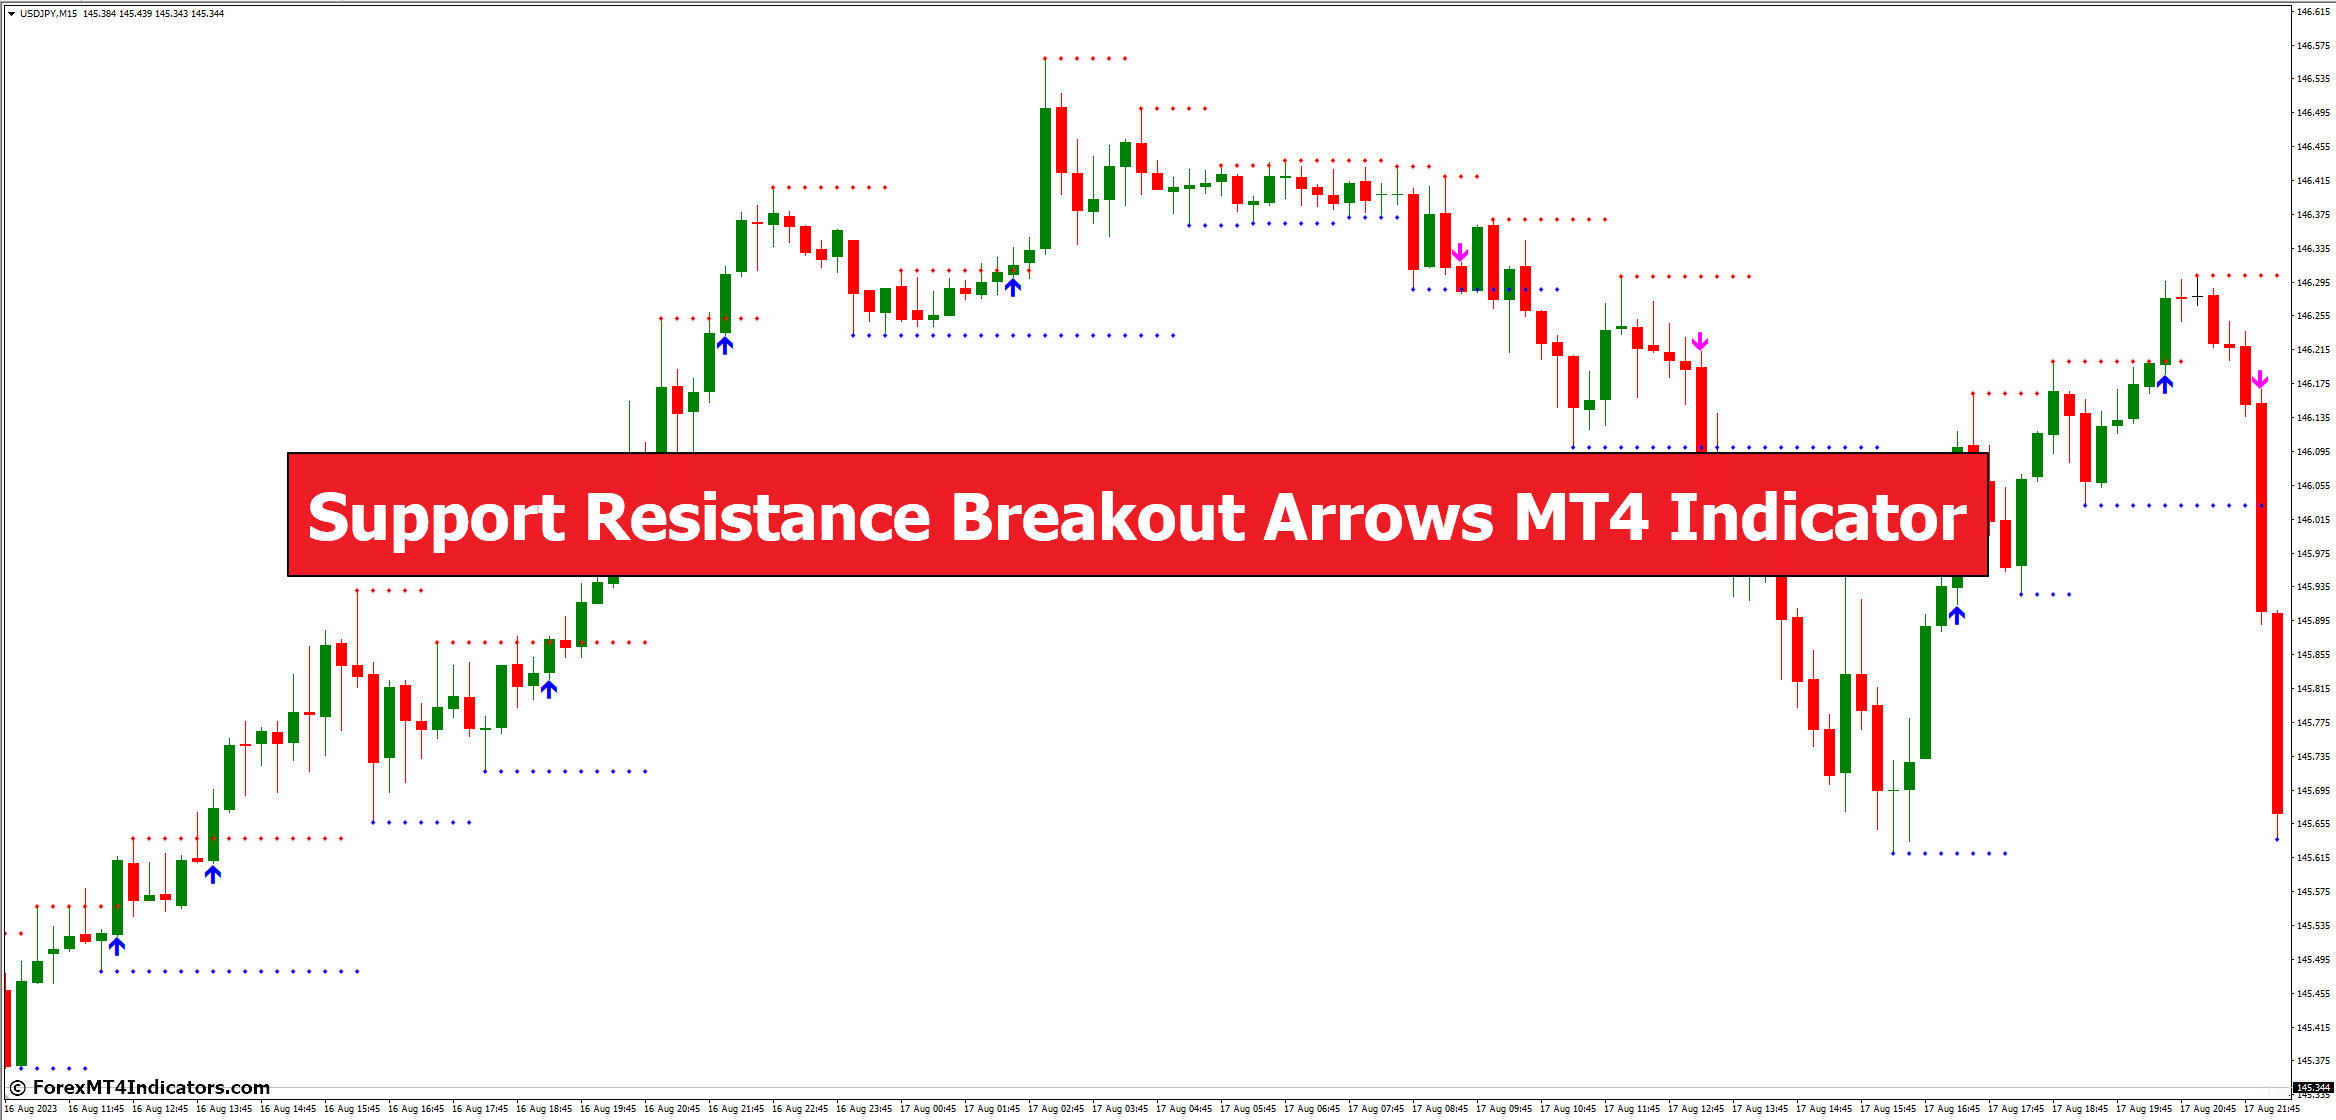 Support Resistance Breakout Arrows MT4 Indicator